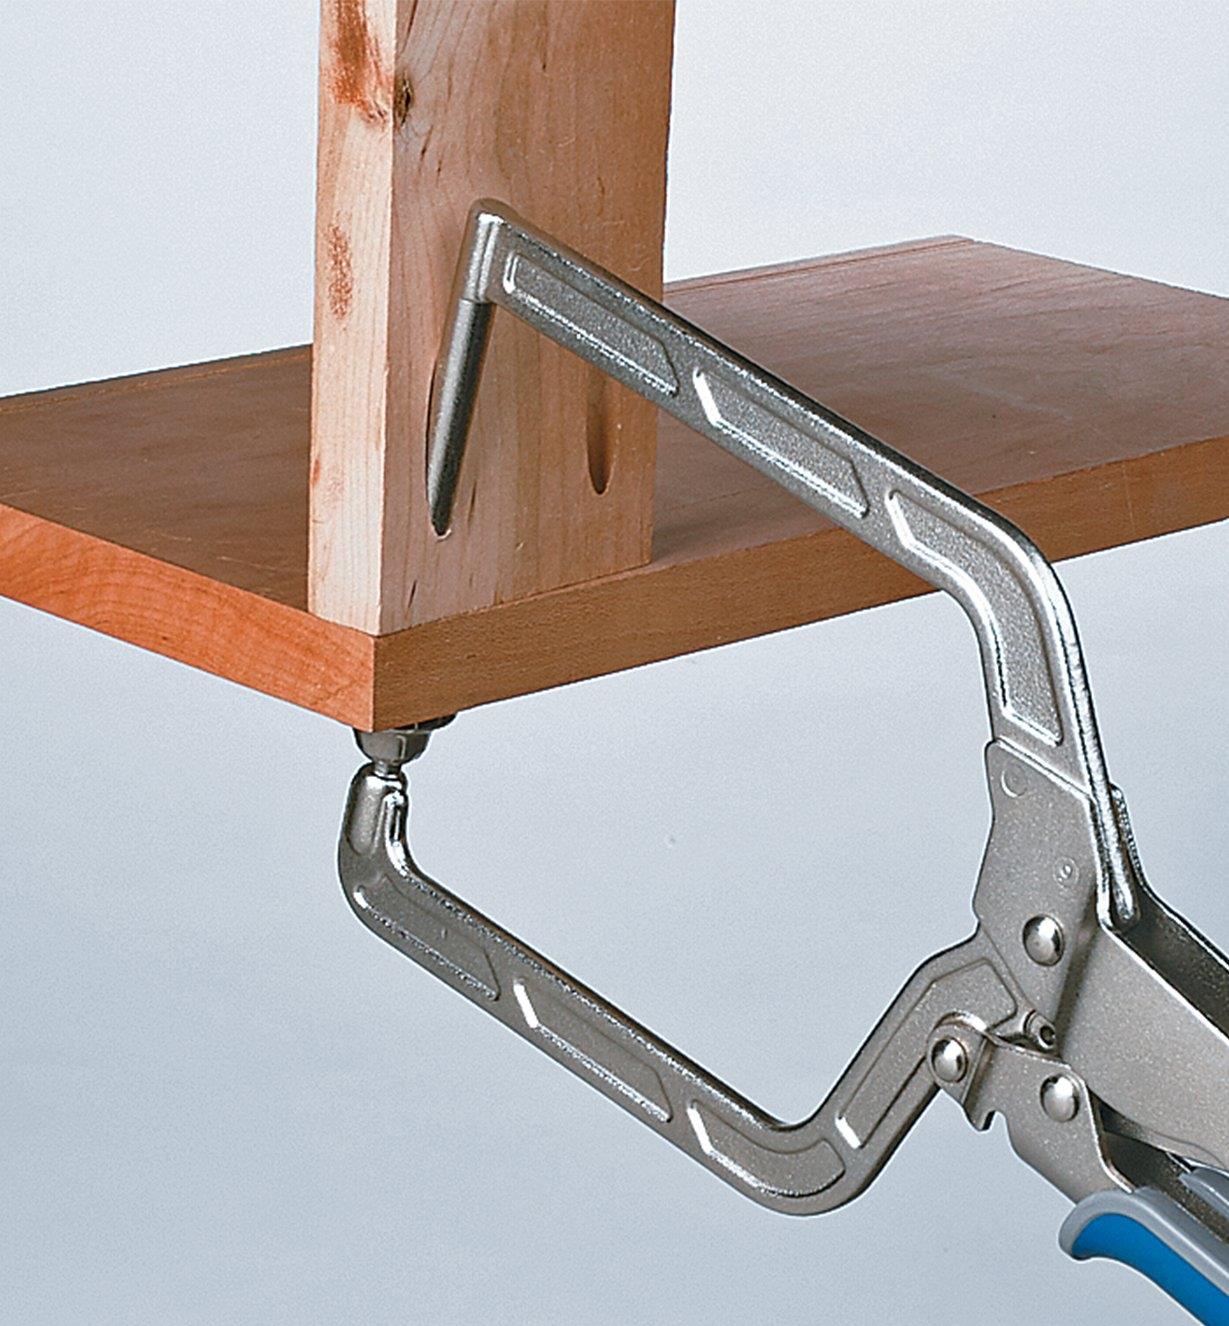 Clamping perpendicular boards using the right-angle auto-adjust clamp